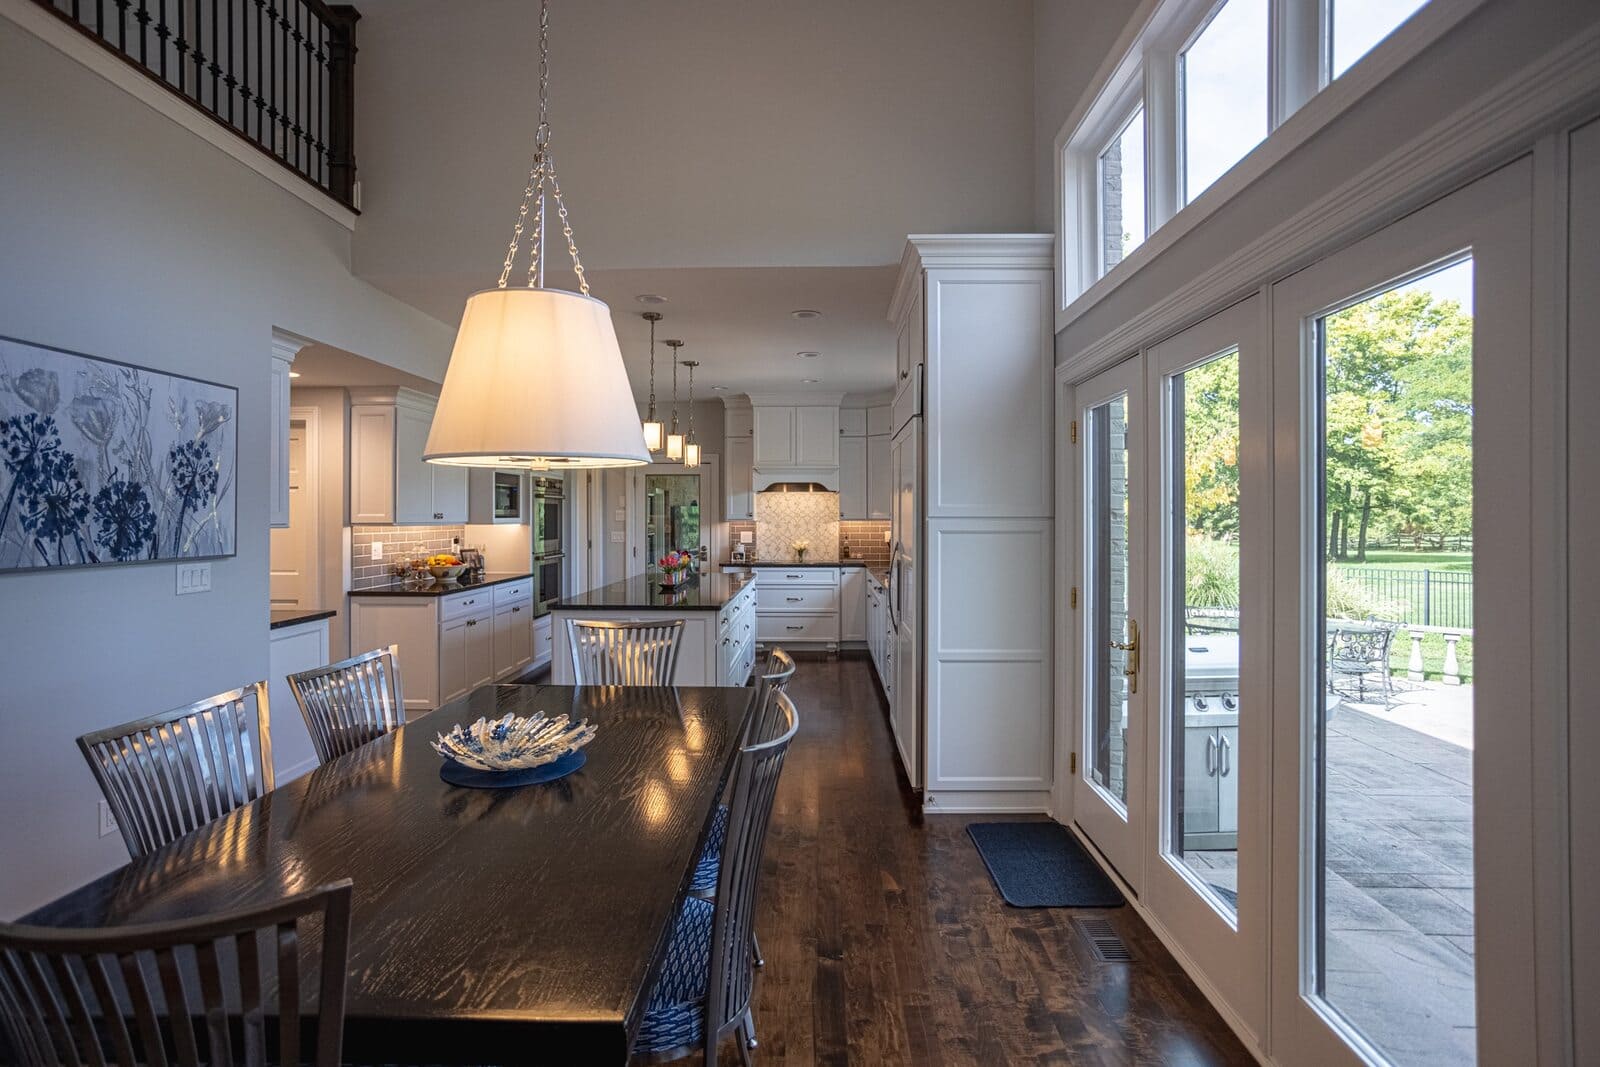 OPEN KITCHEN DINING ROOM WITH A VIEW